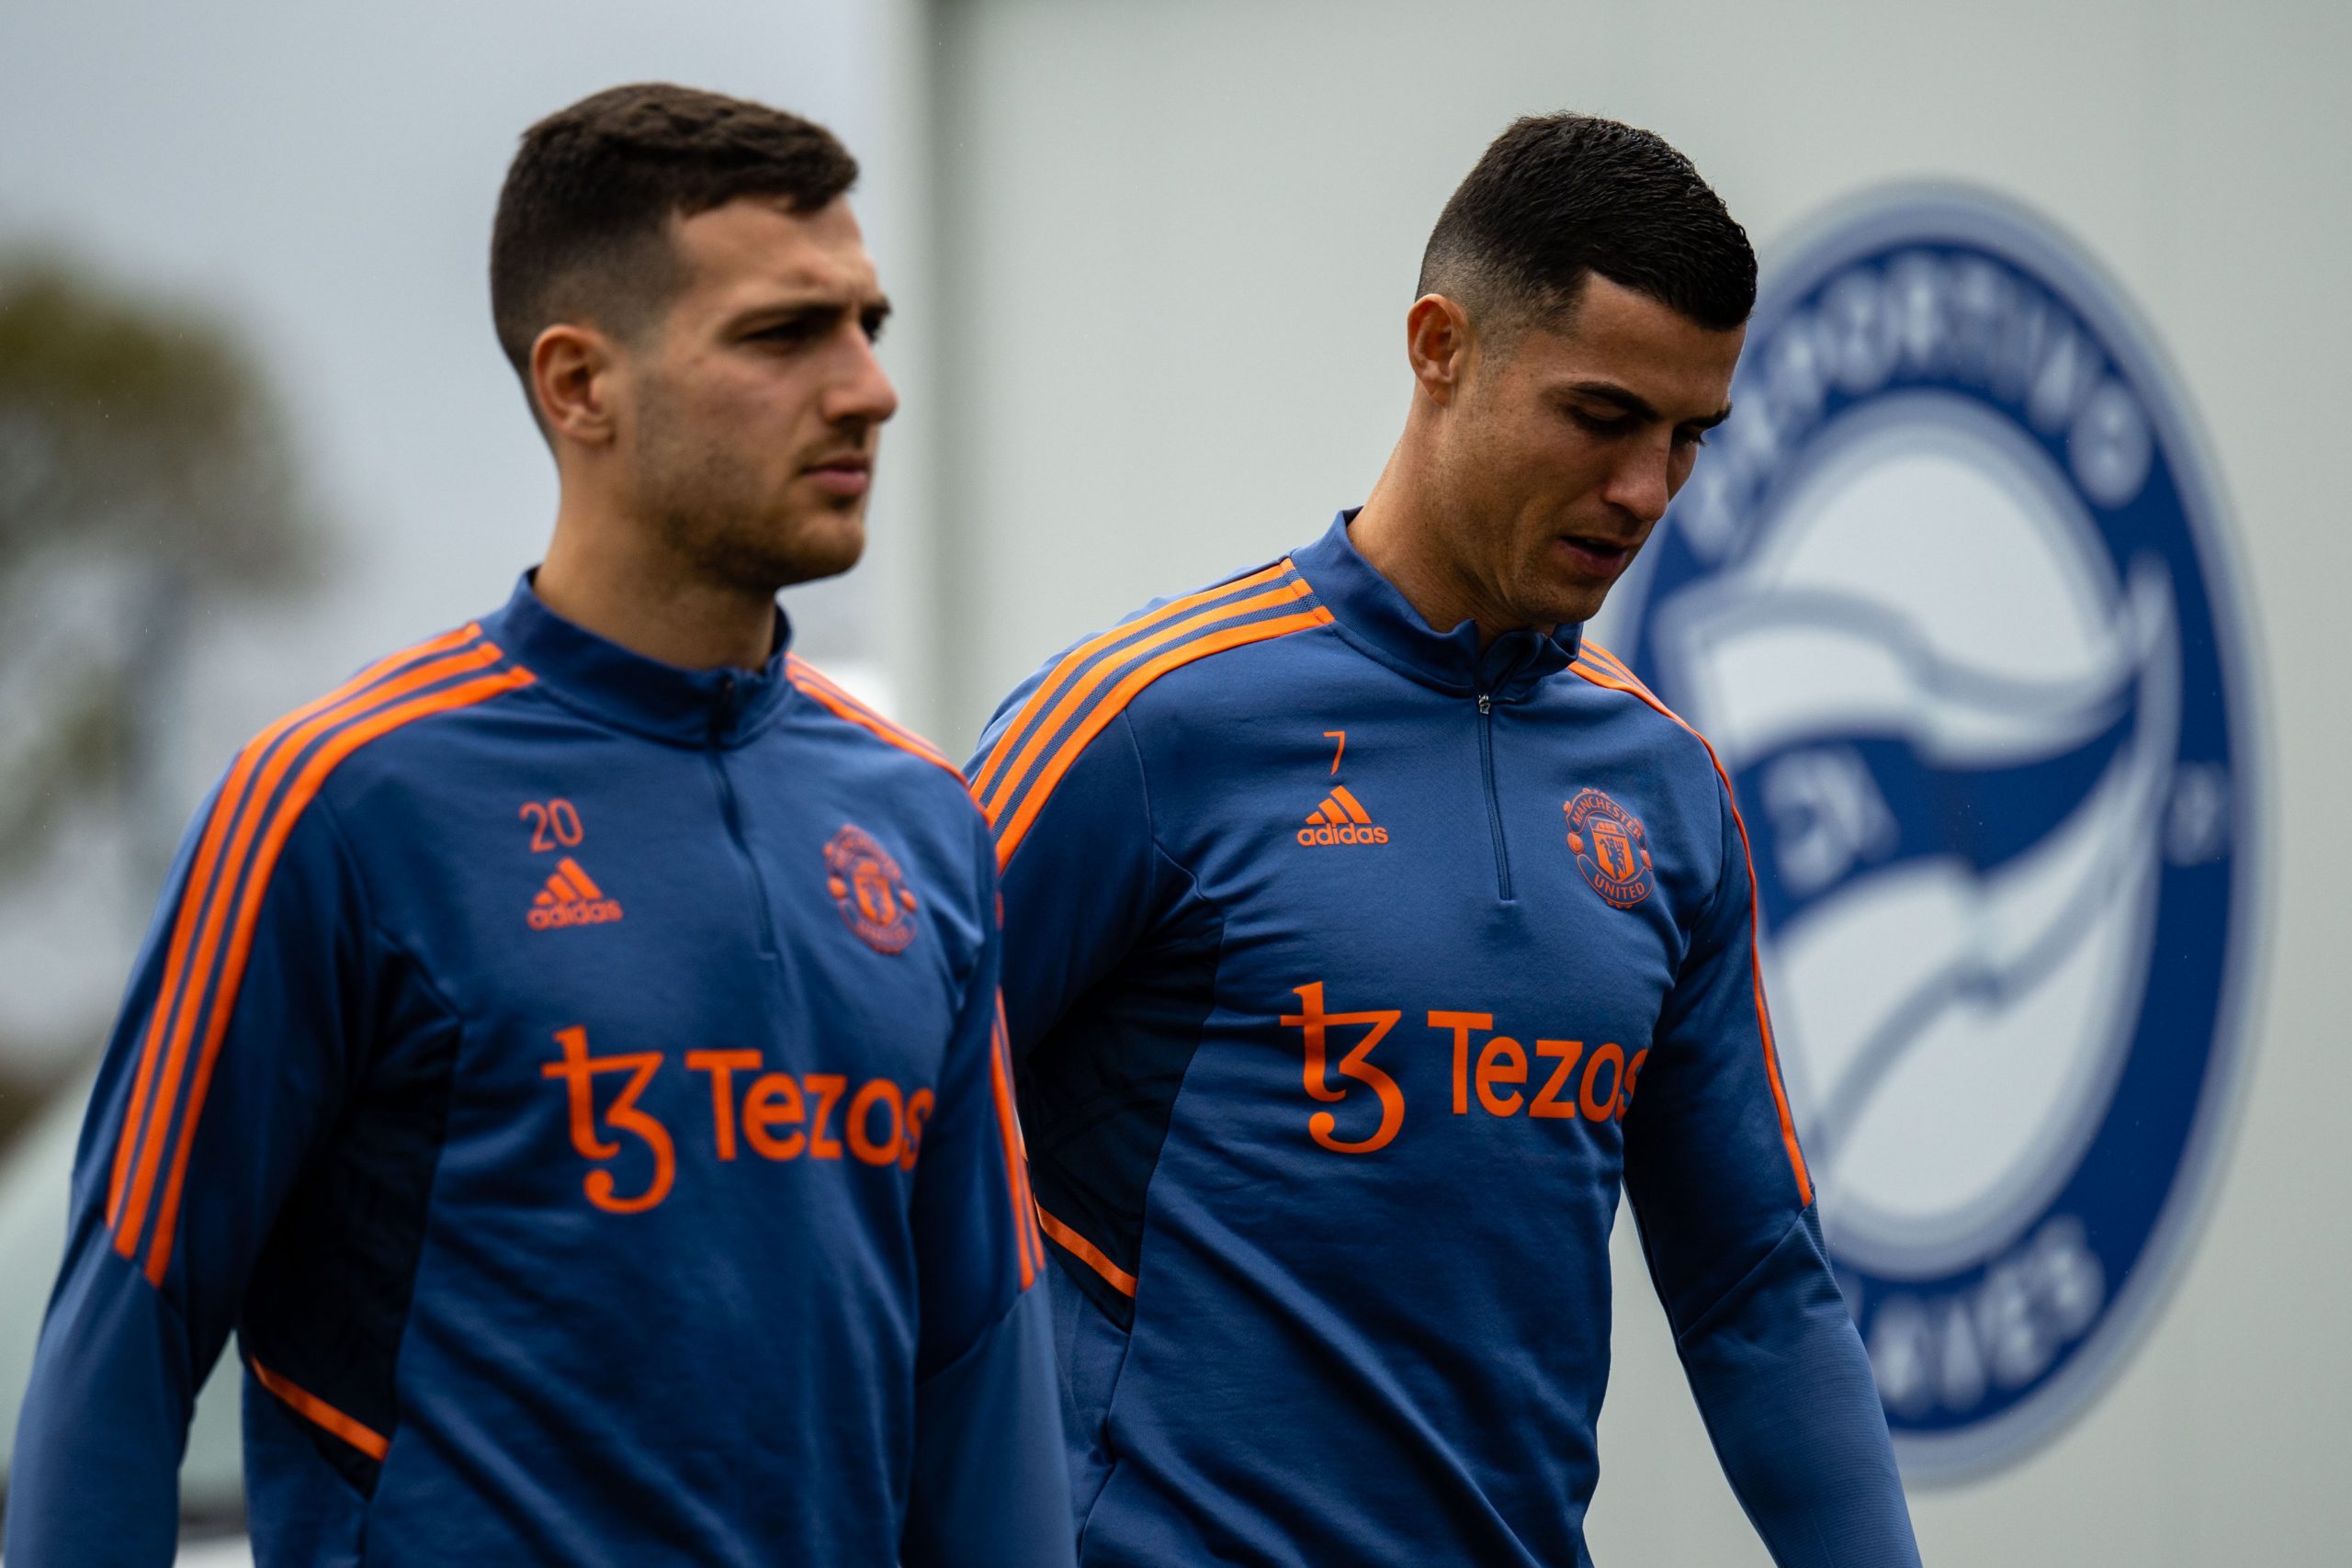 Cristiano Ronaldo and Diogo Dalot photographed together at training. But will they feature in our Manchester United predicted lineup?